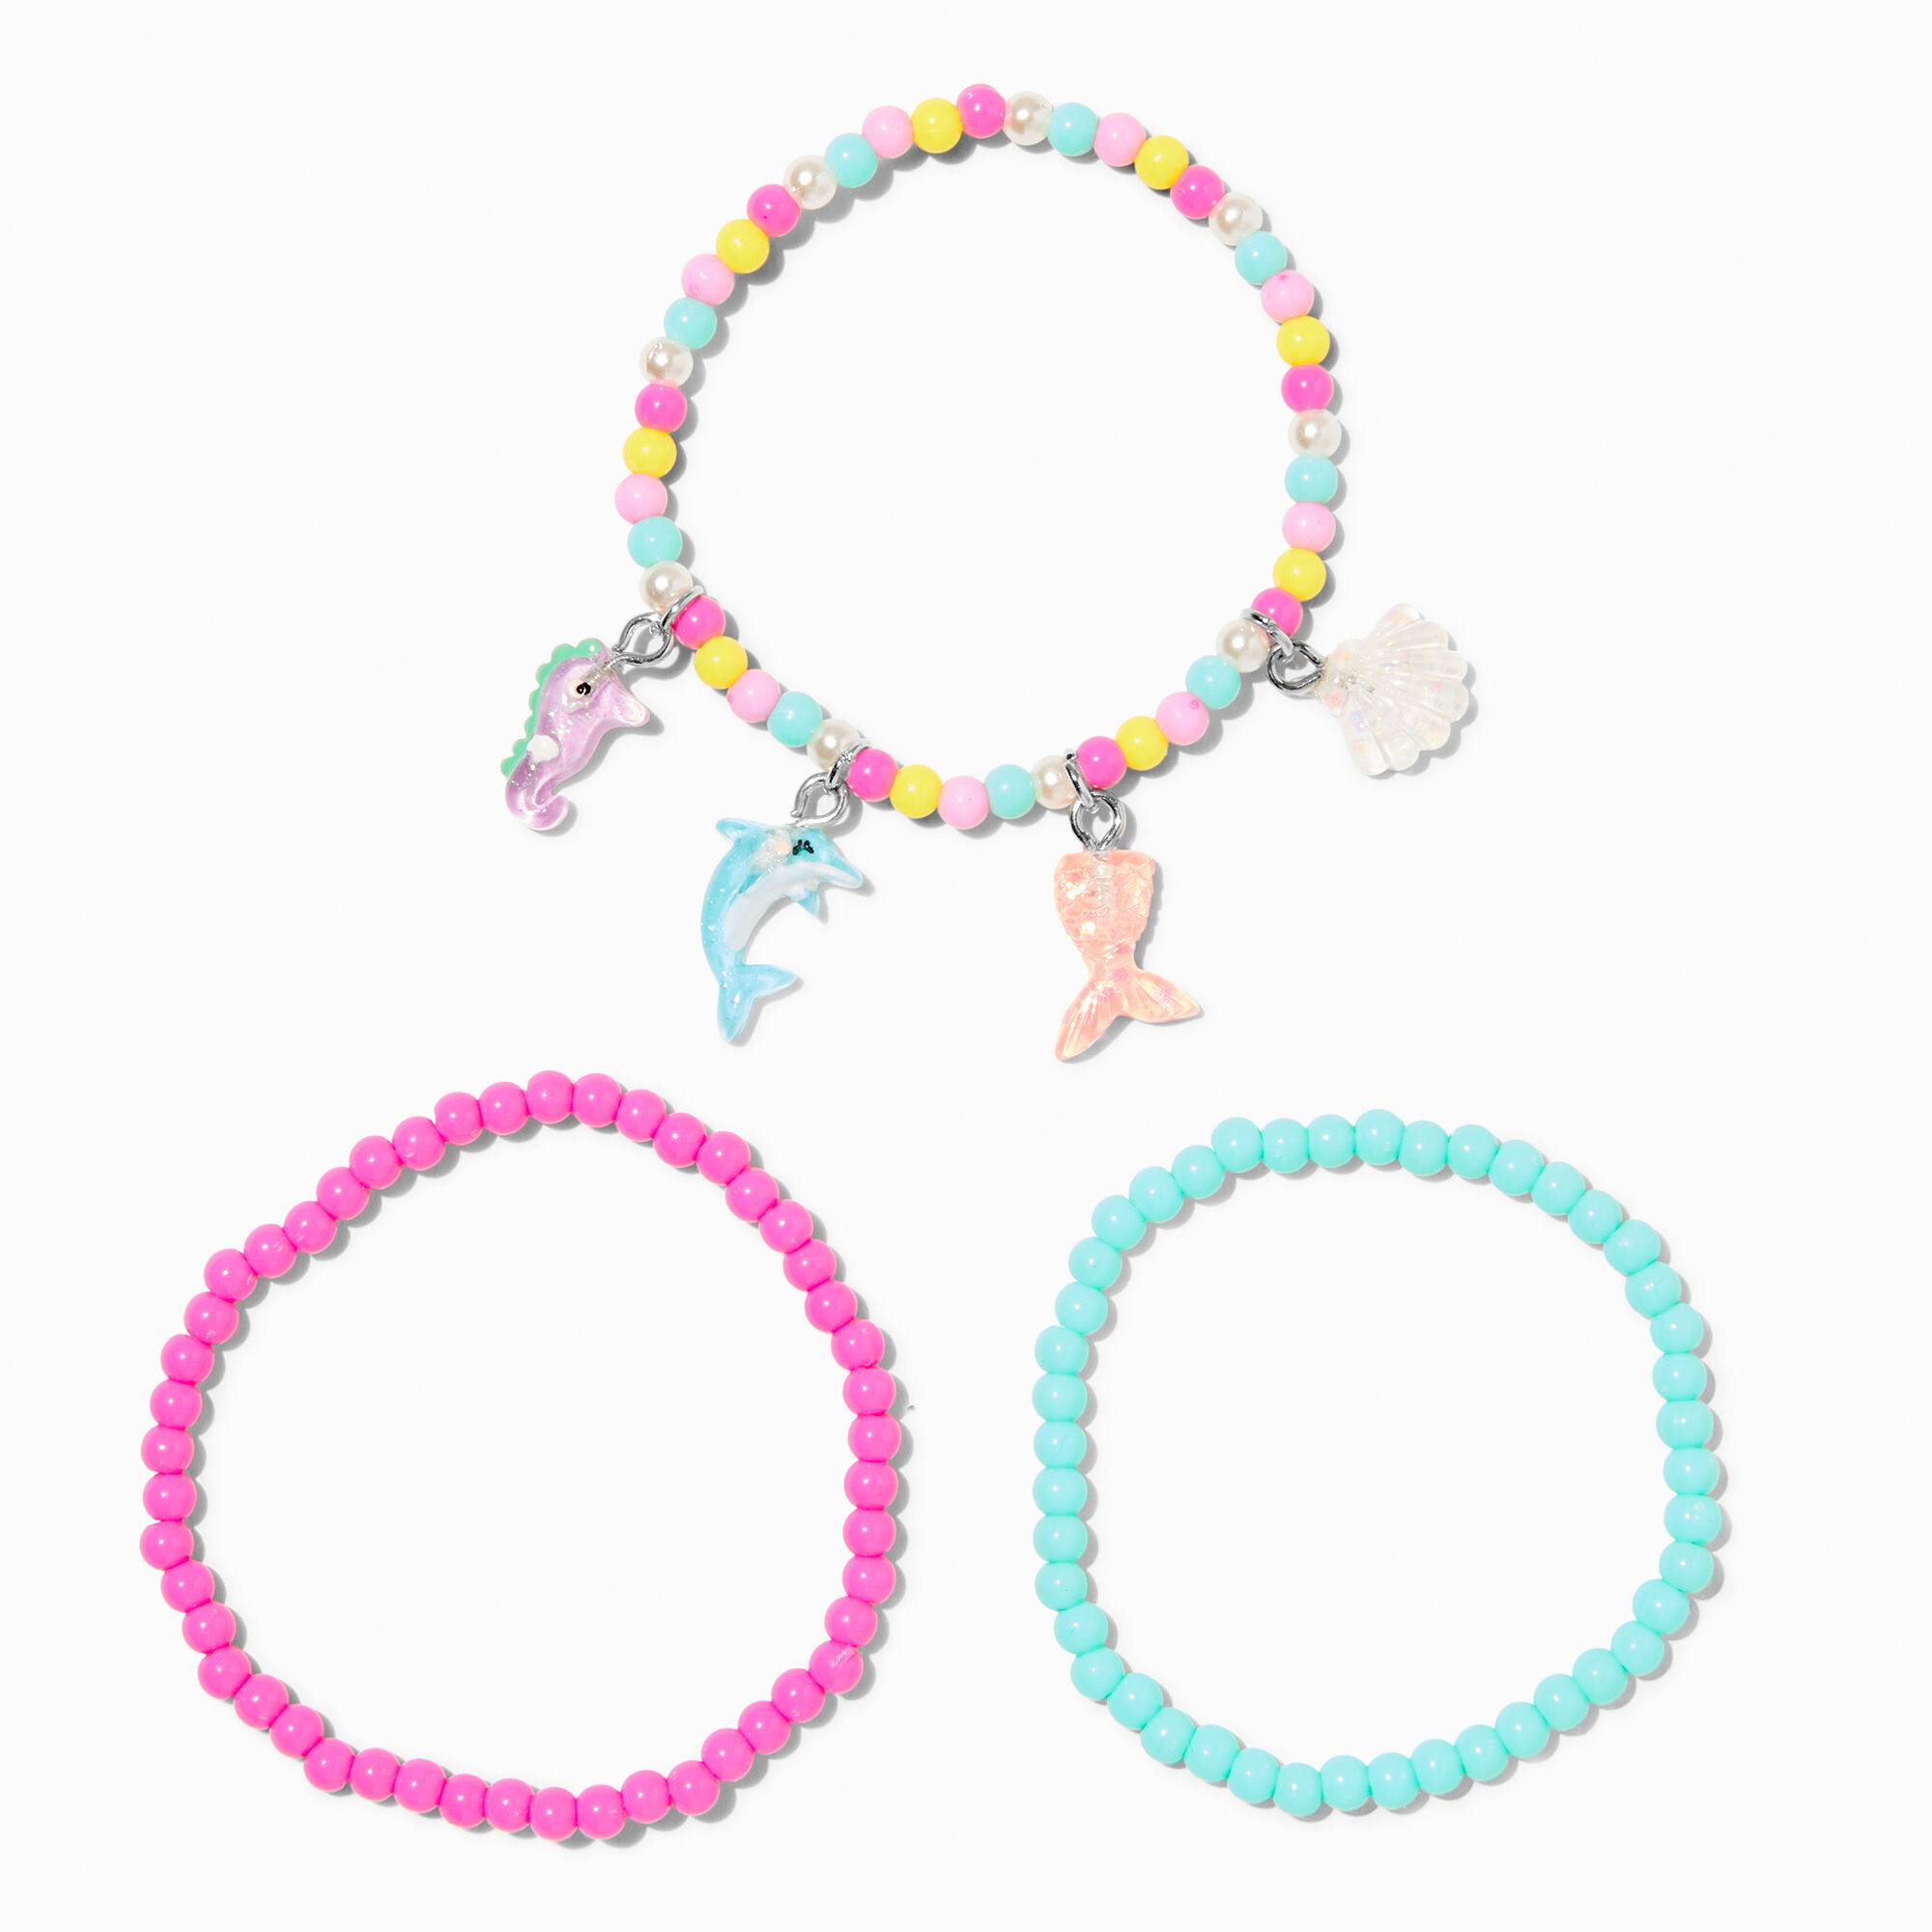 View Claires Club Sea Critter Beaded Stretch Bracelets 3 Pack information